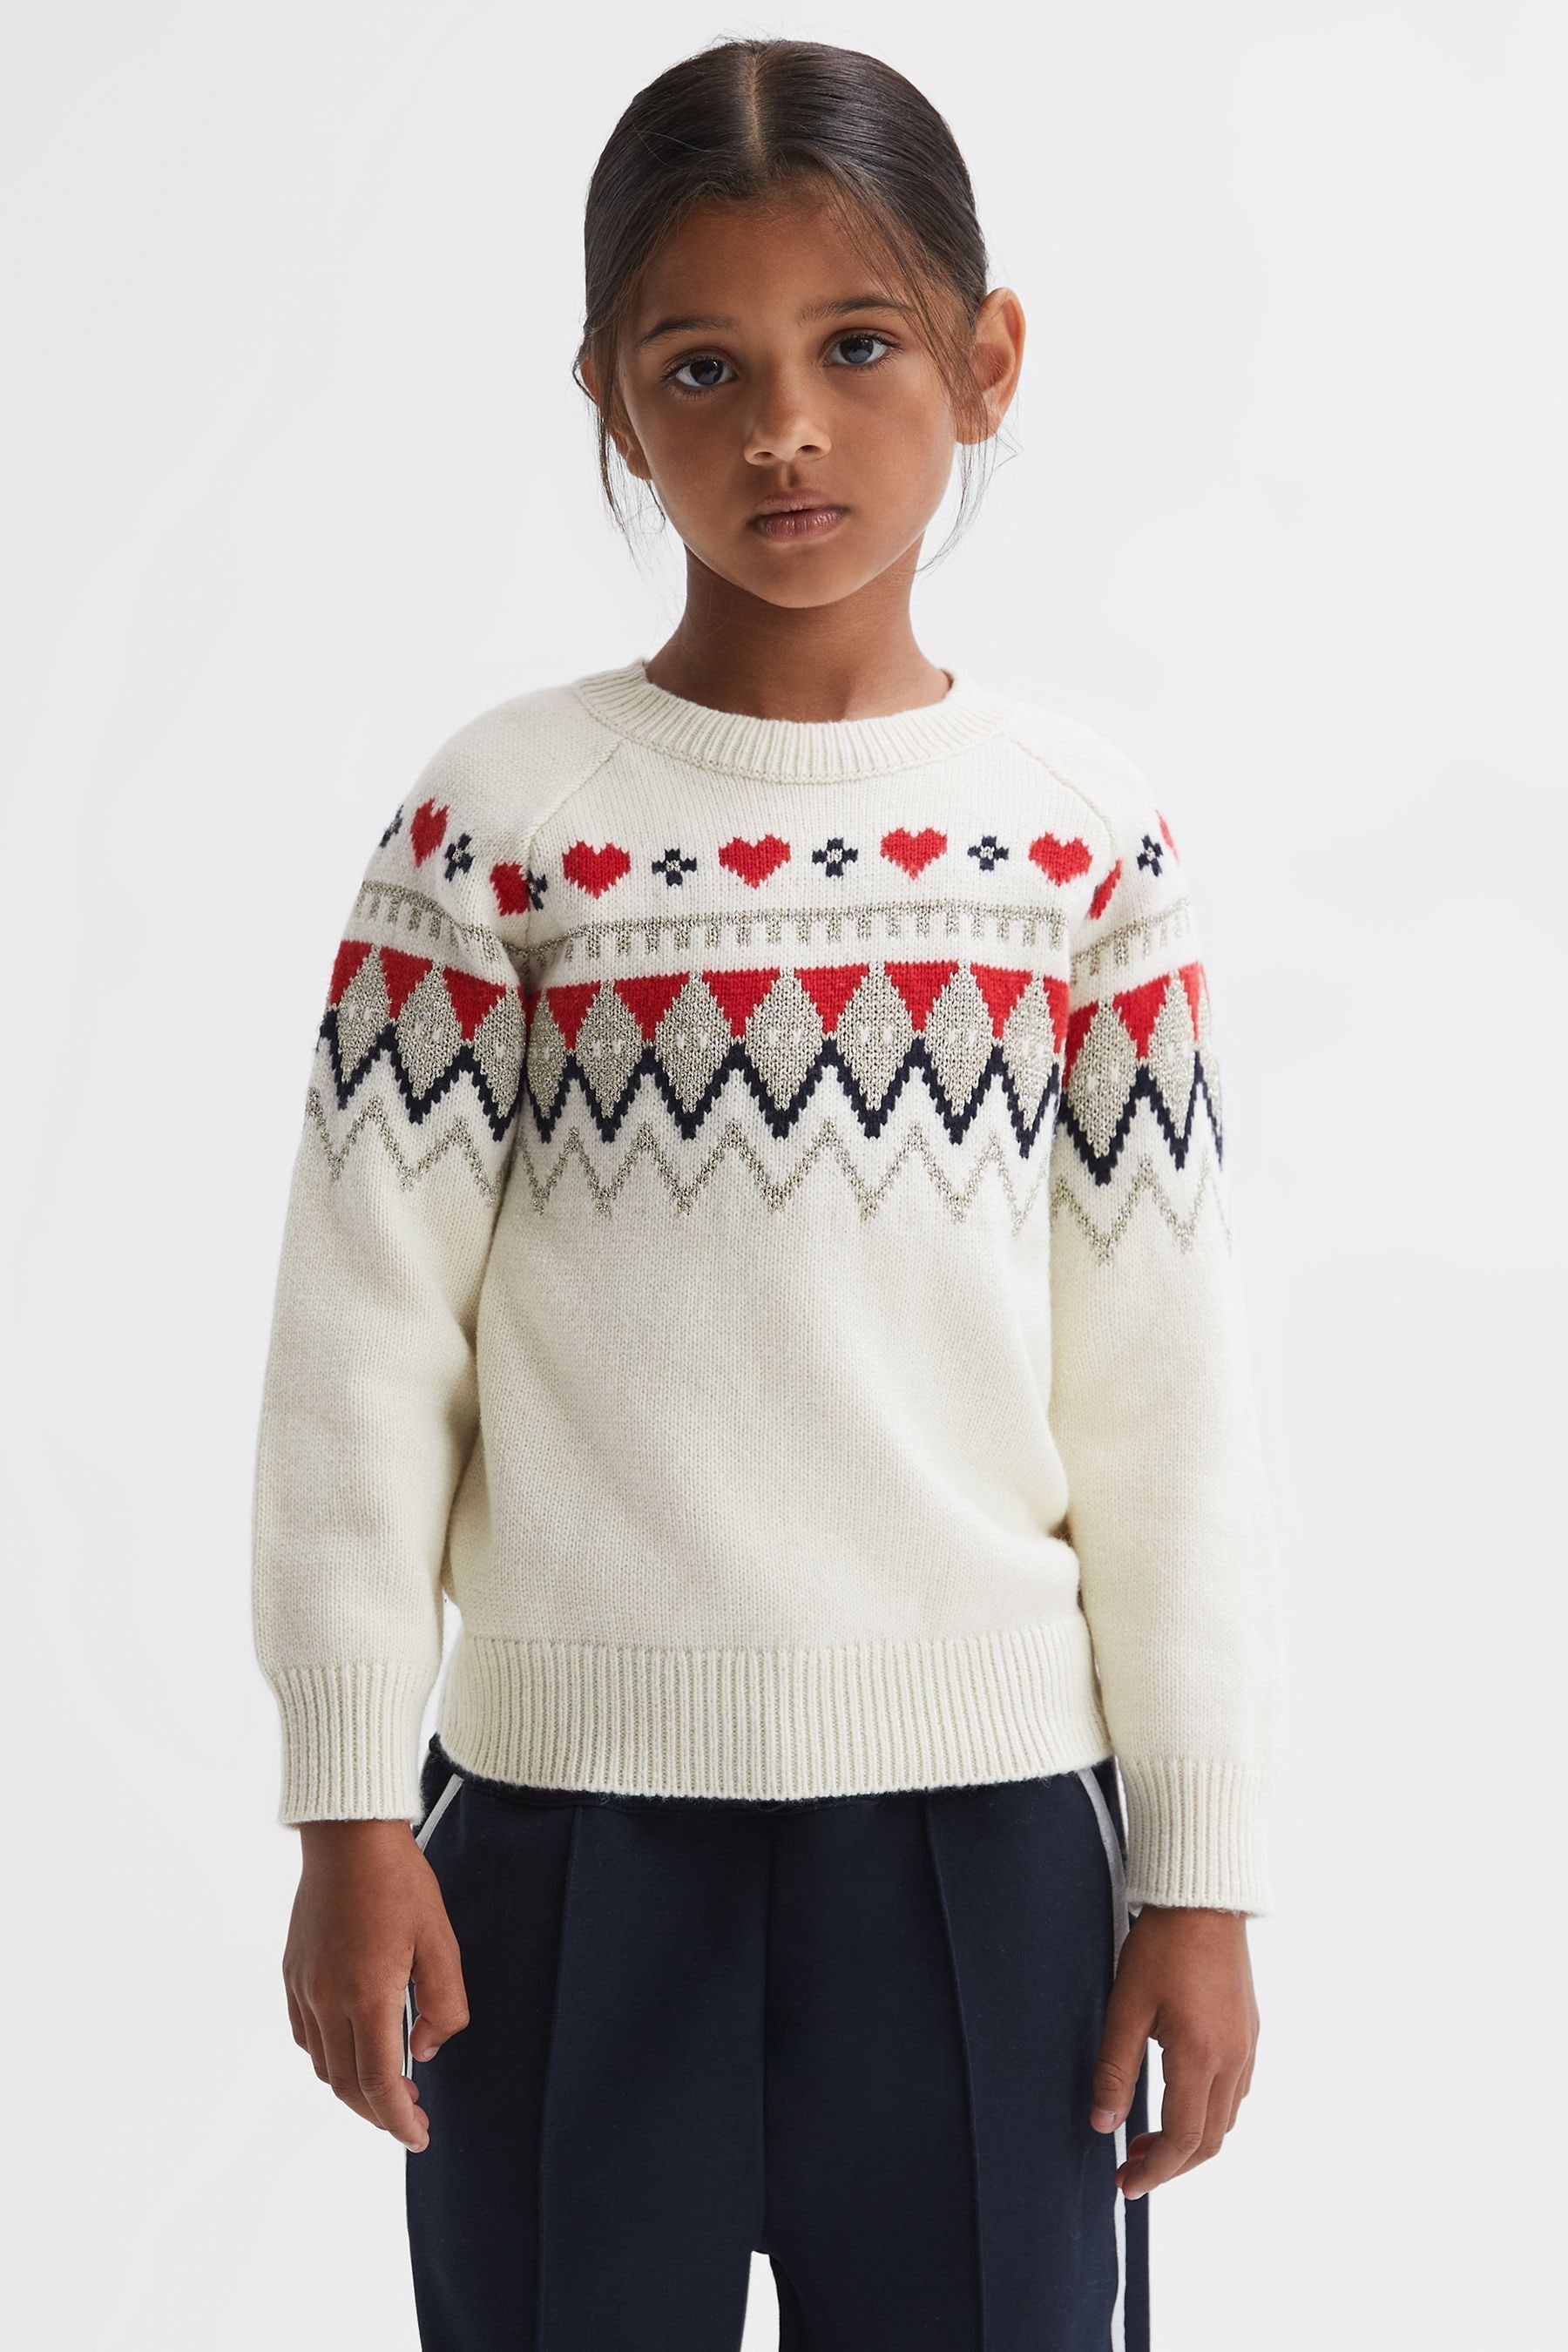 Reiss Charlotte - Ivory Junior Relaxed Wool-cotton Argyle Jumper, Age 6-7 Years